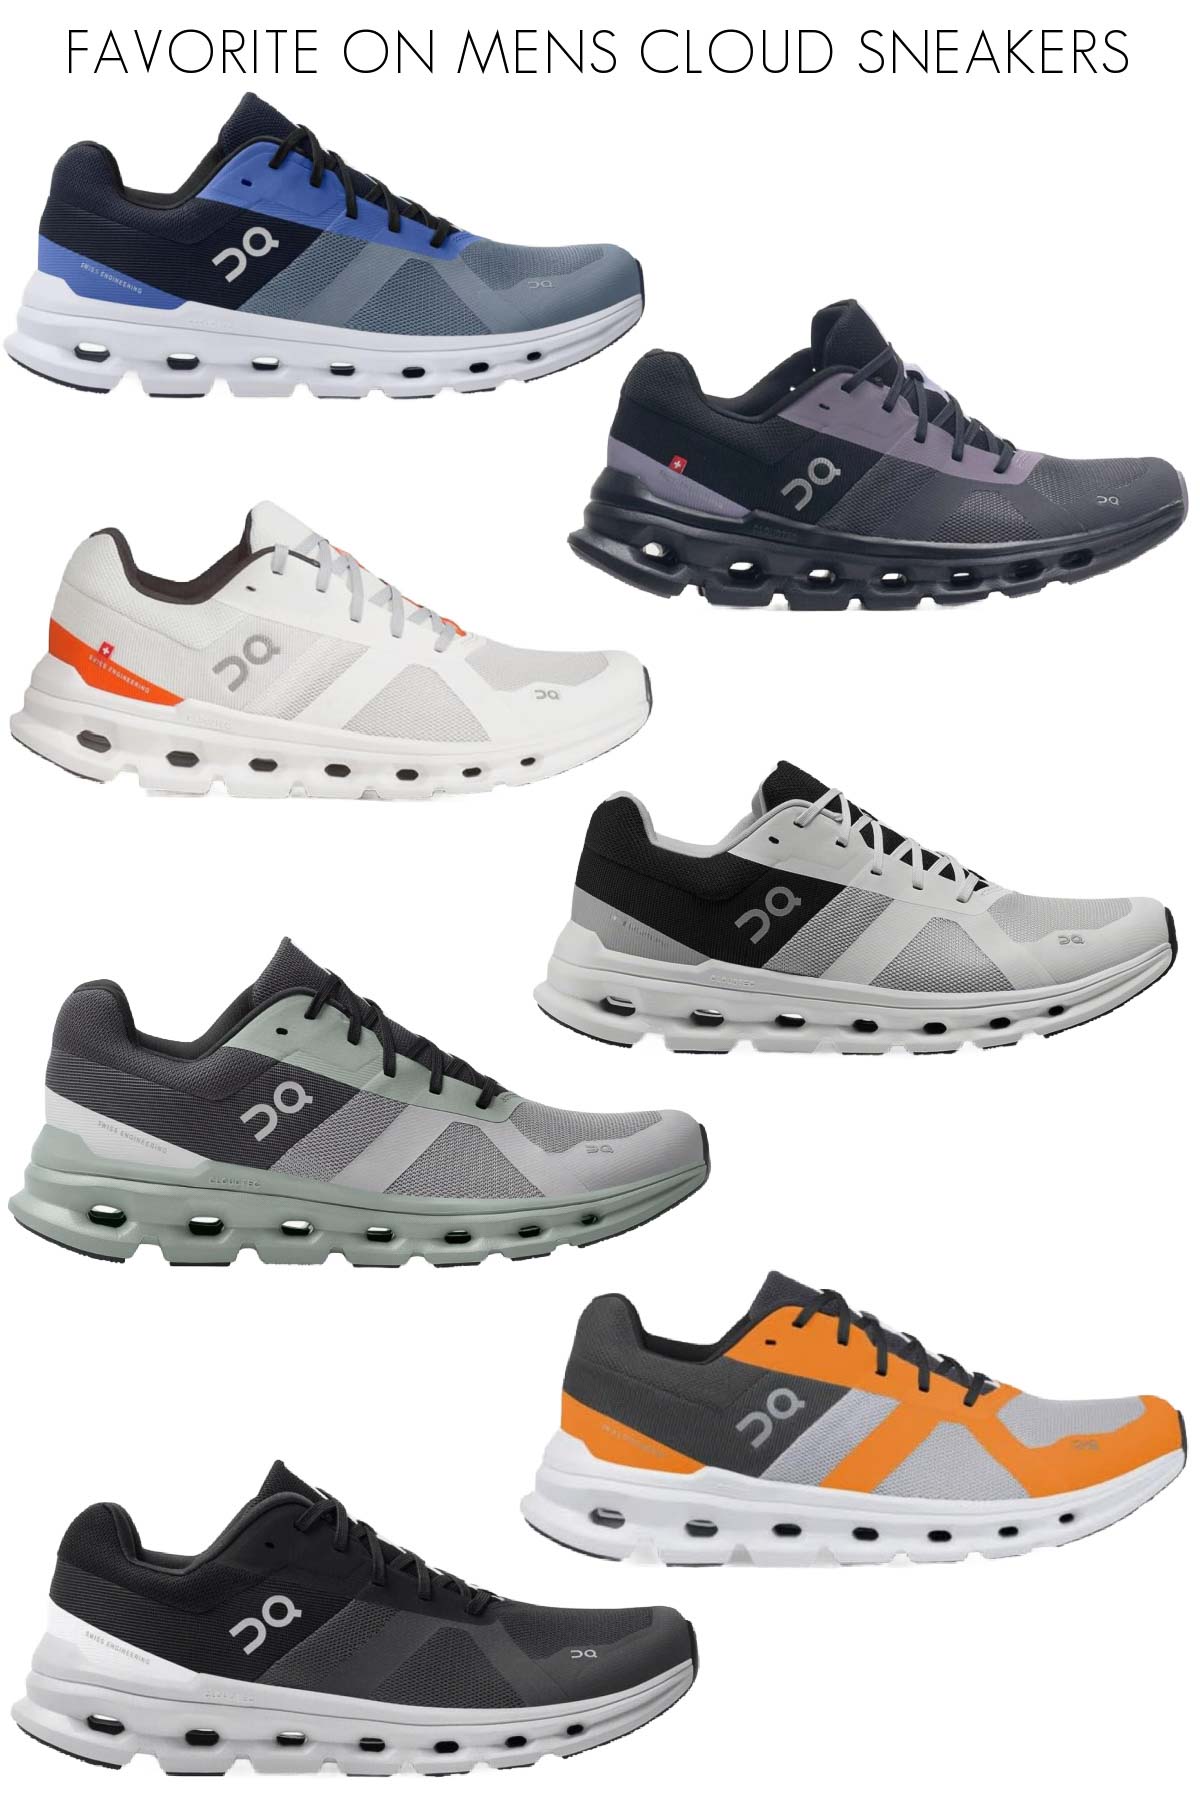 On Cloud running shoes for men as a Christmas wish list gift